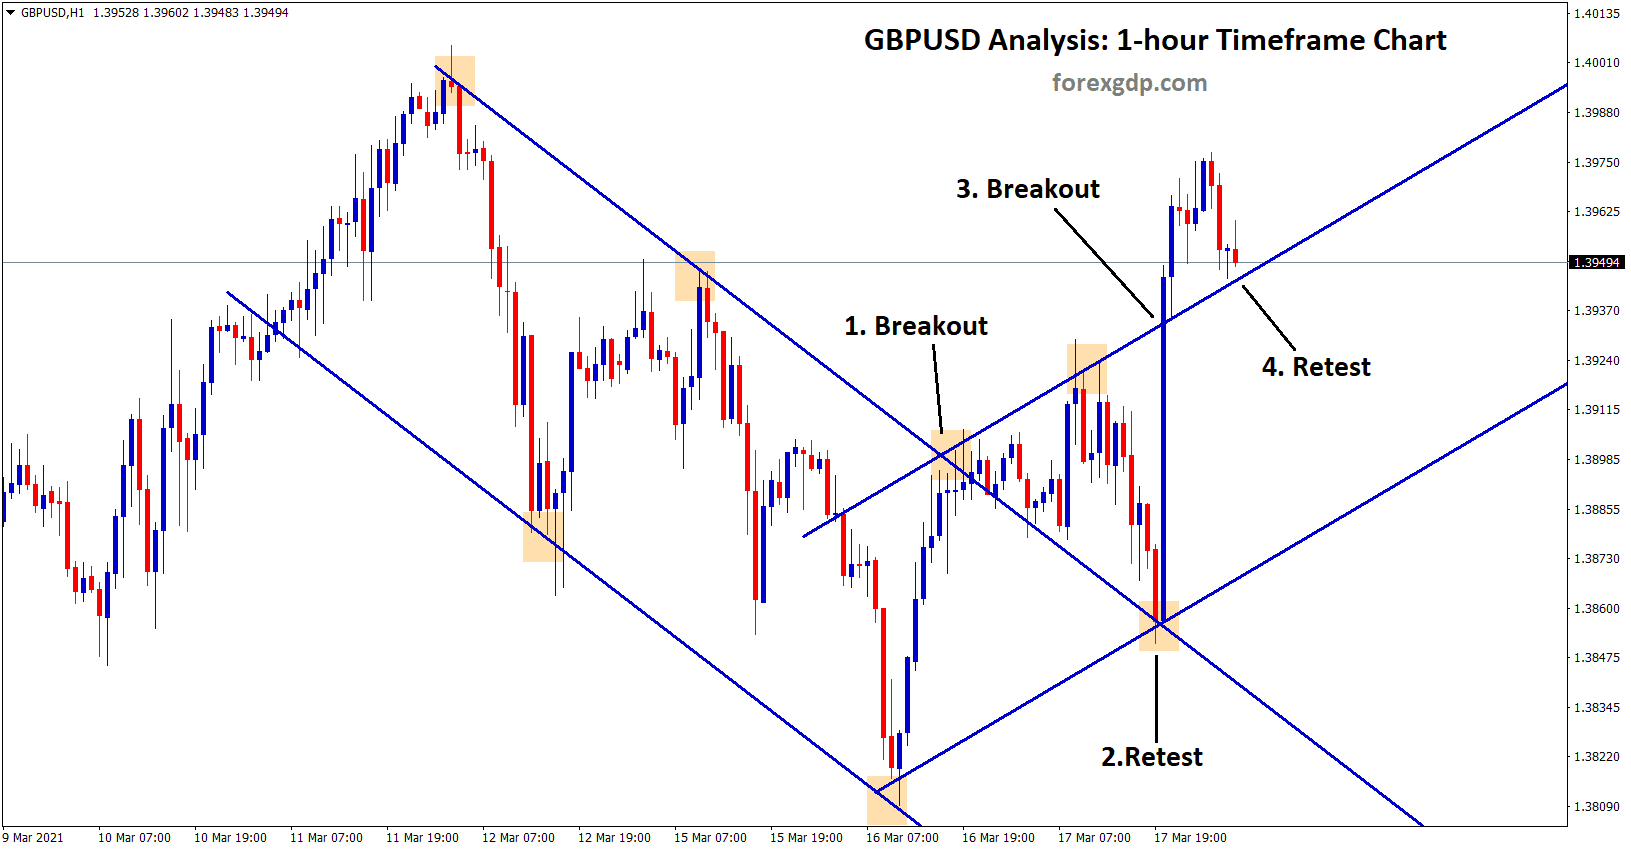 gbpusd breakout and retest continuously in two channels range